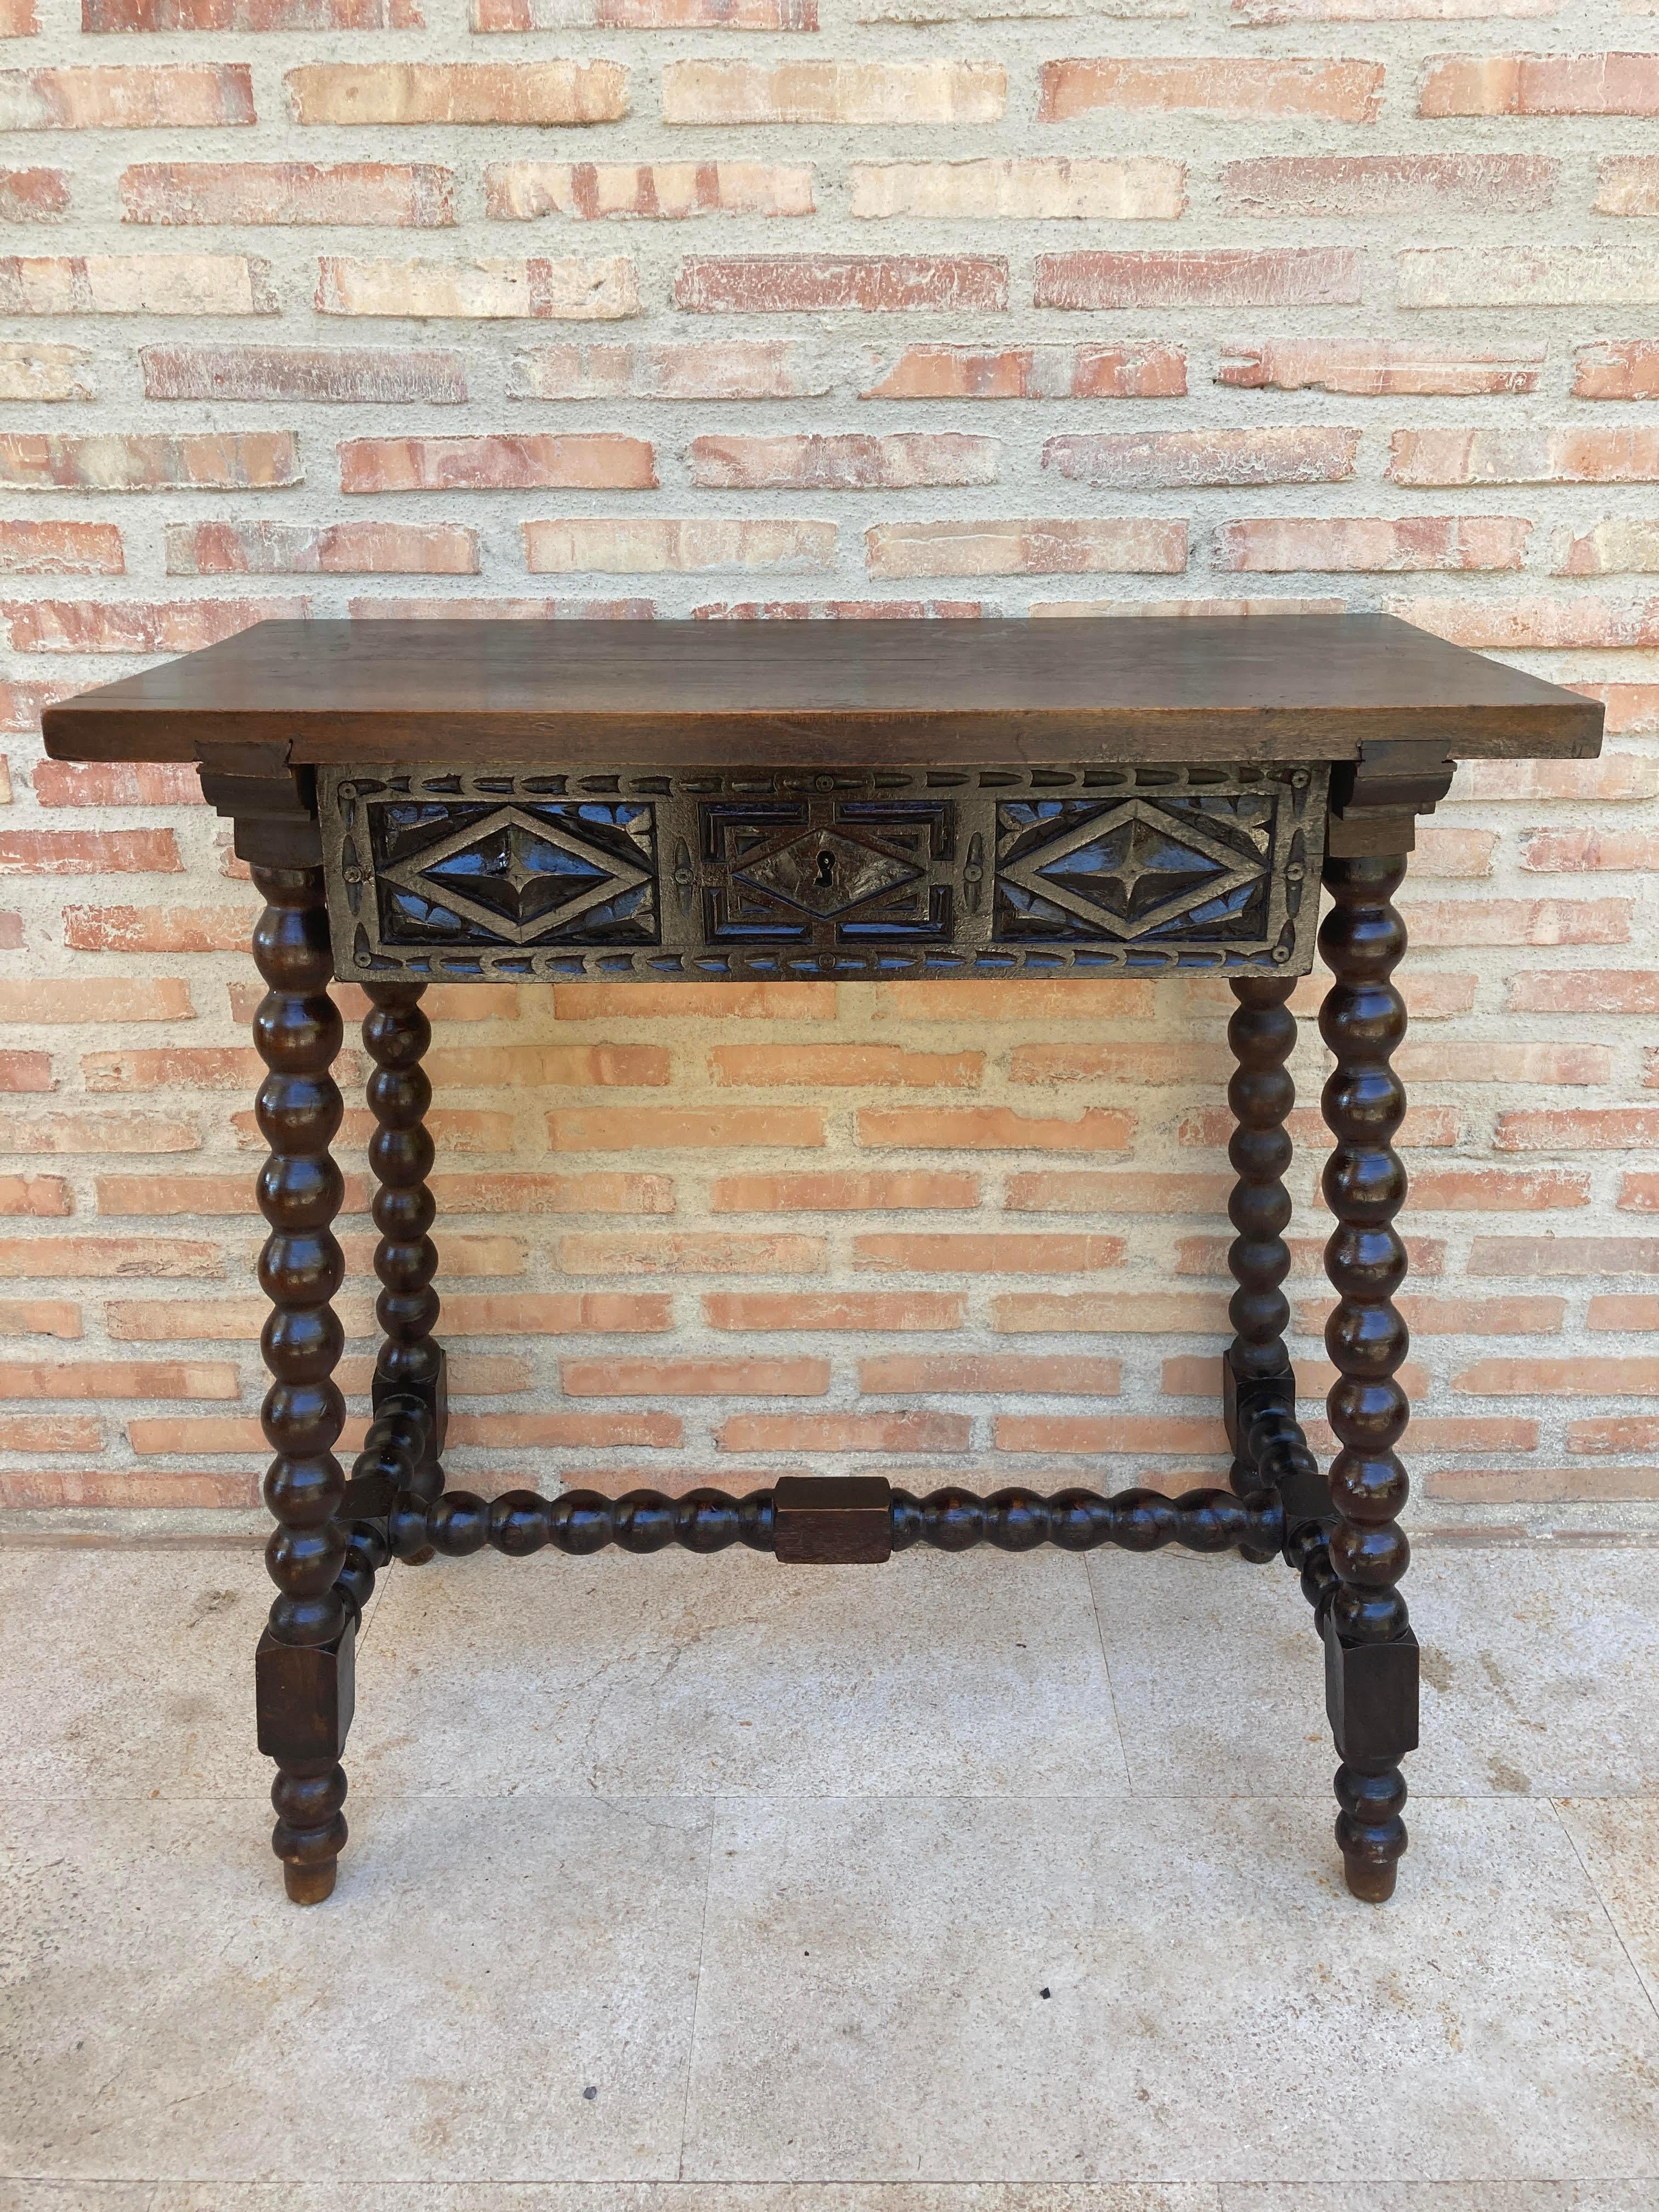 Baroque 19th Century Spanish Walnut Side Table with Turned Legs, Flat Top with a Lockabl